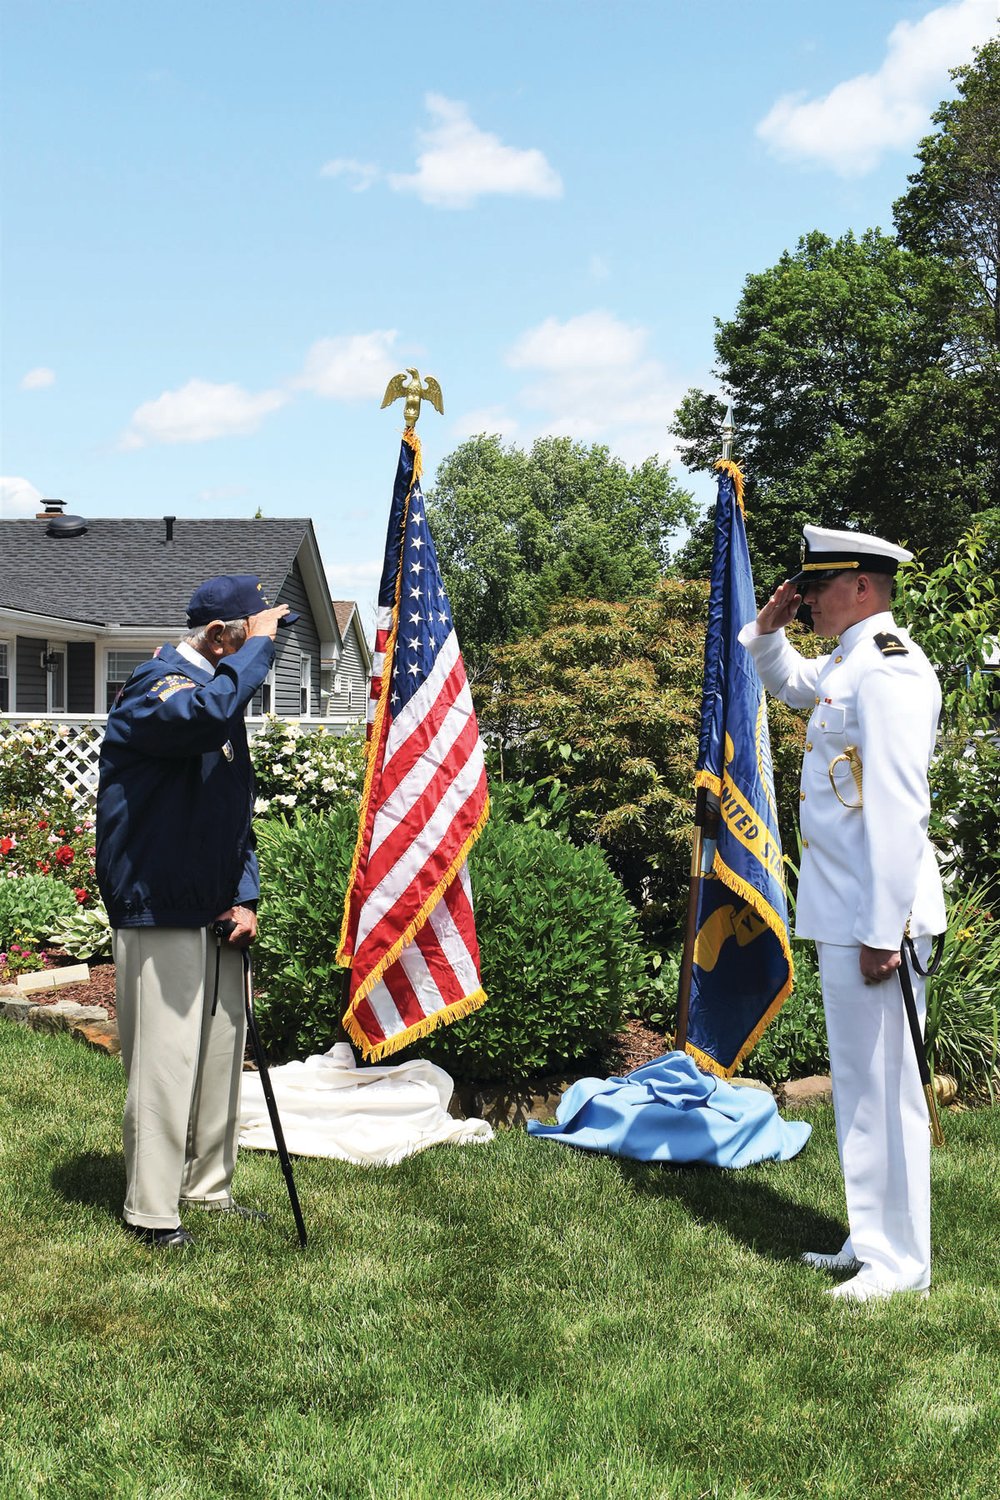 Nathanael Lee Poff exchanges his first salute with his grandfather, Jack Lee Poff of Phillipsburg, N.J.